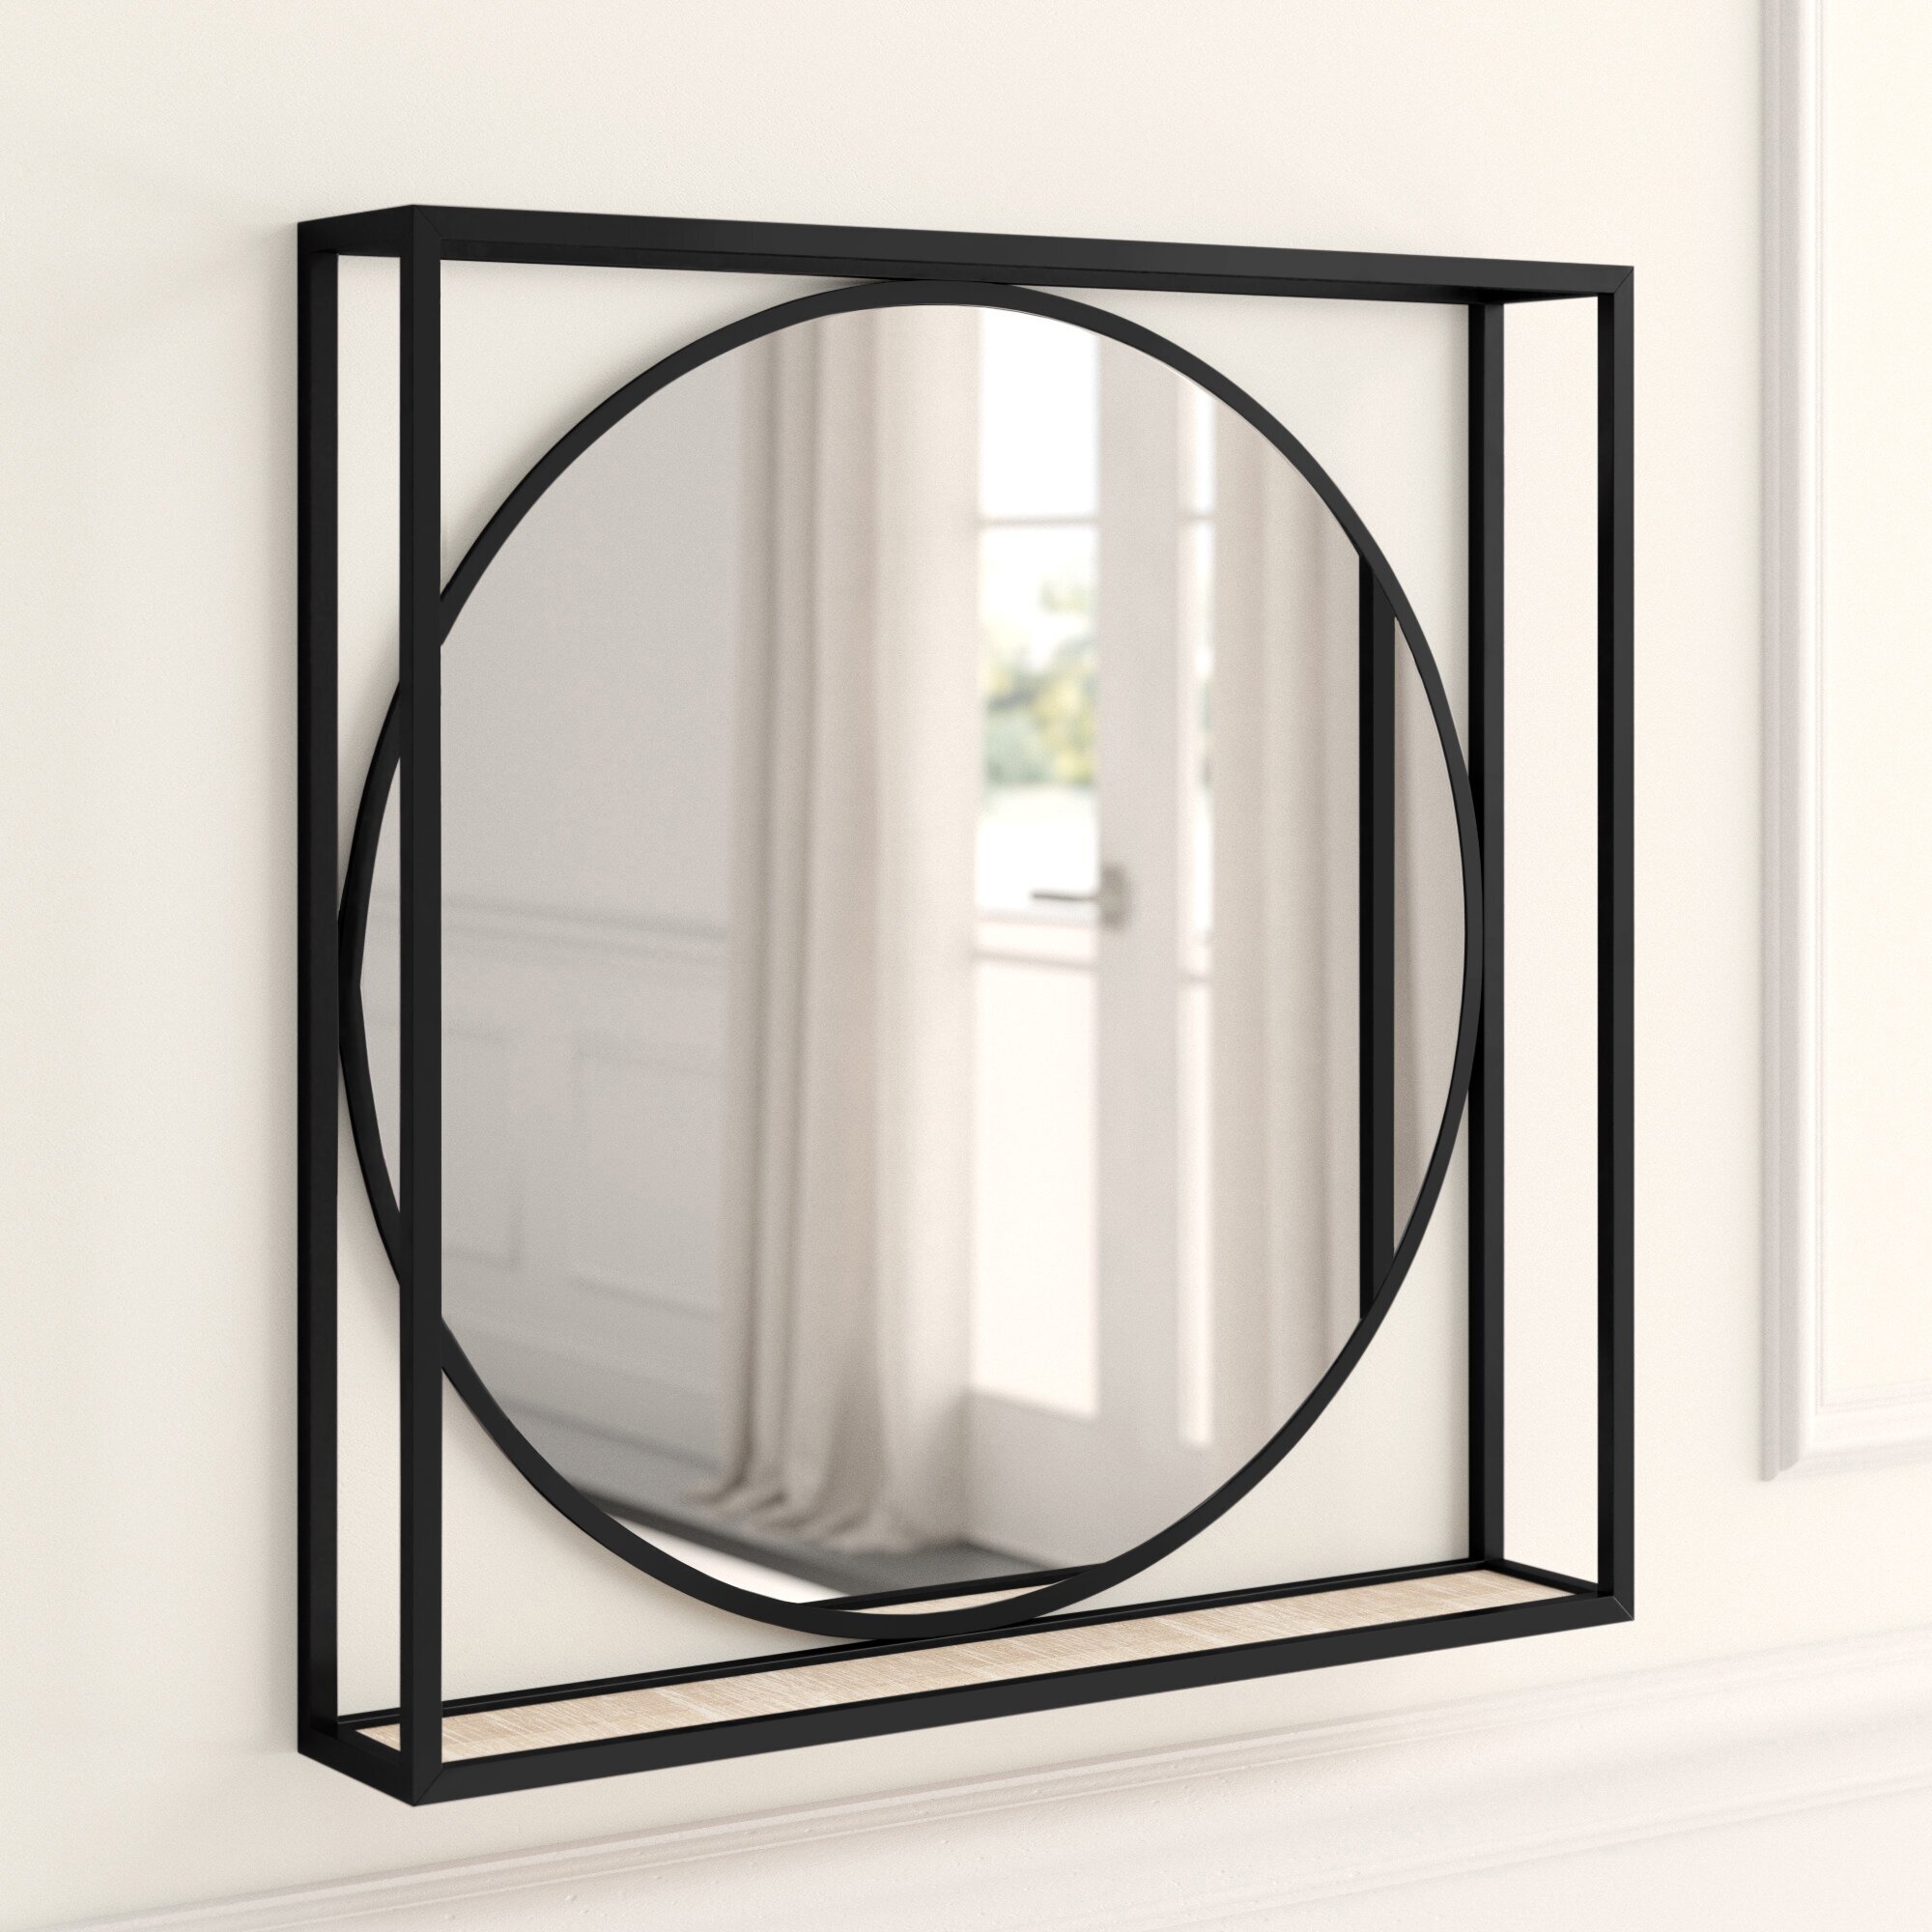 Marblehead Beveled Accent Mirror, $173